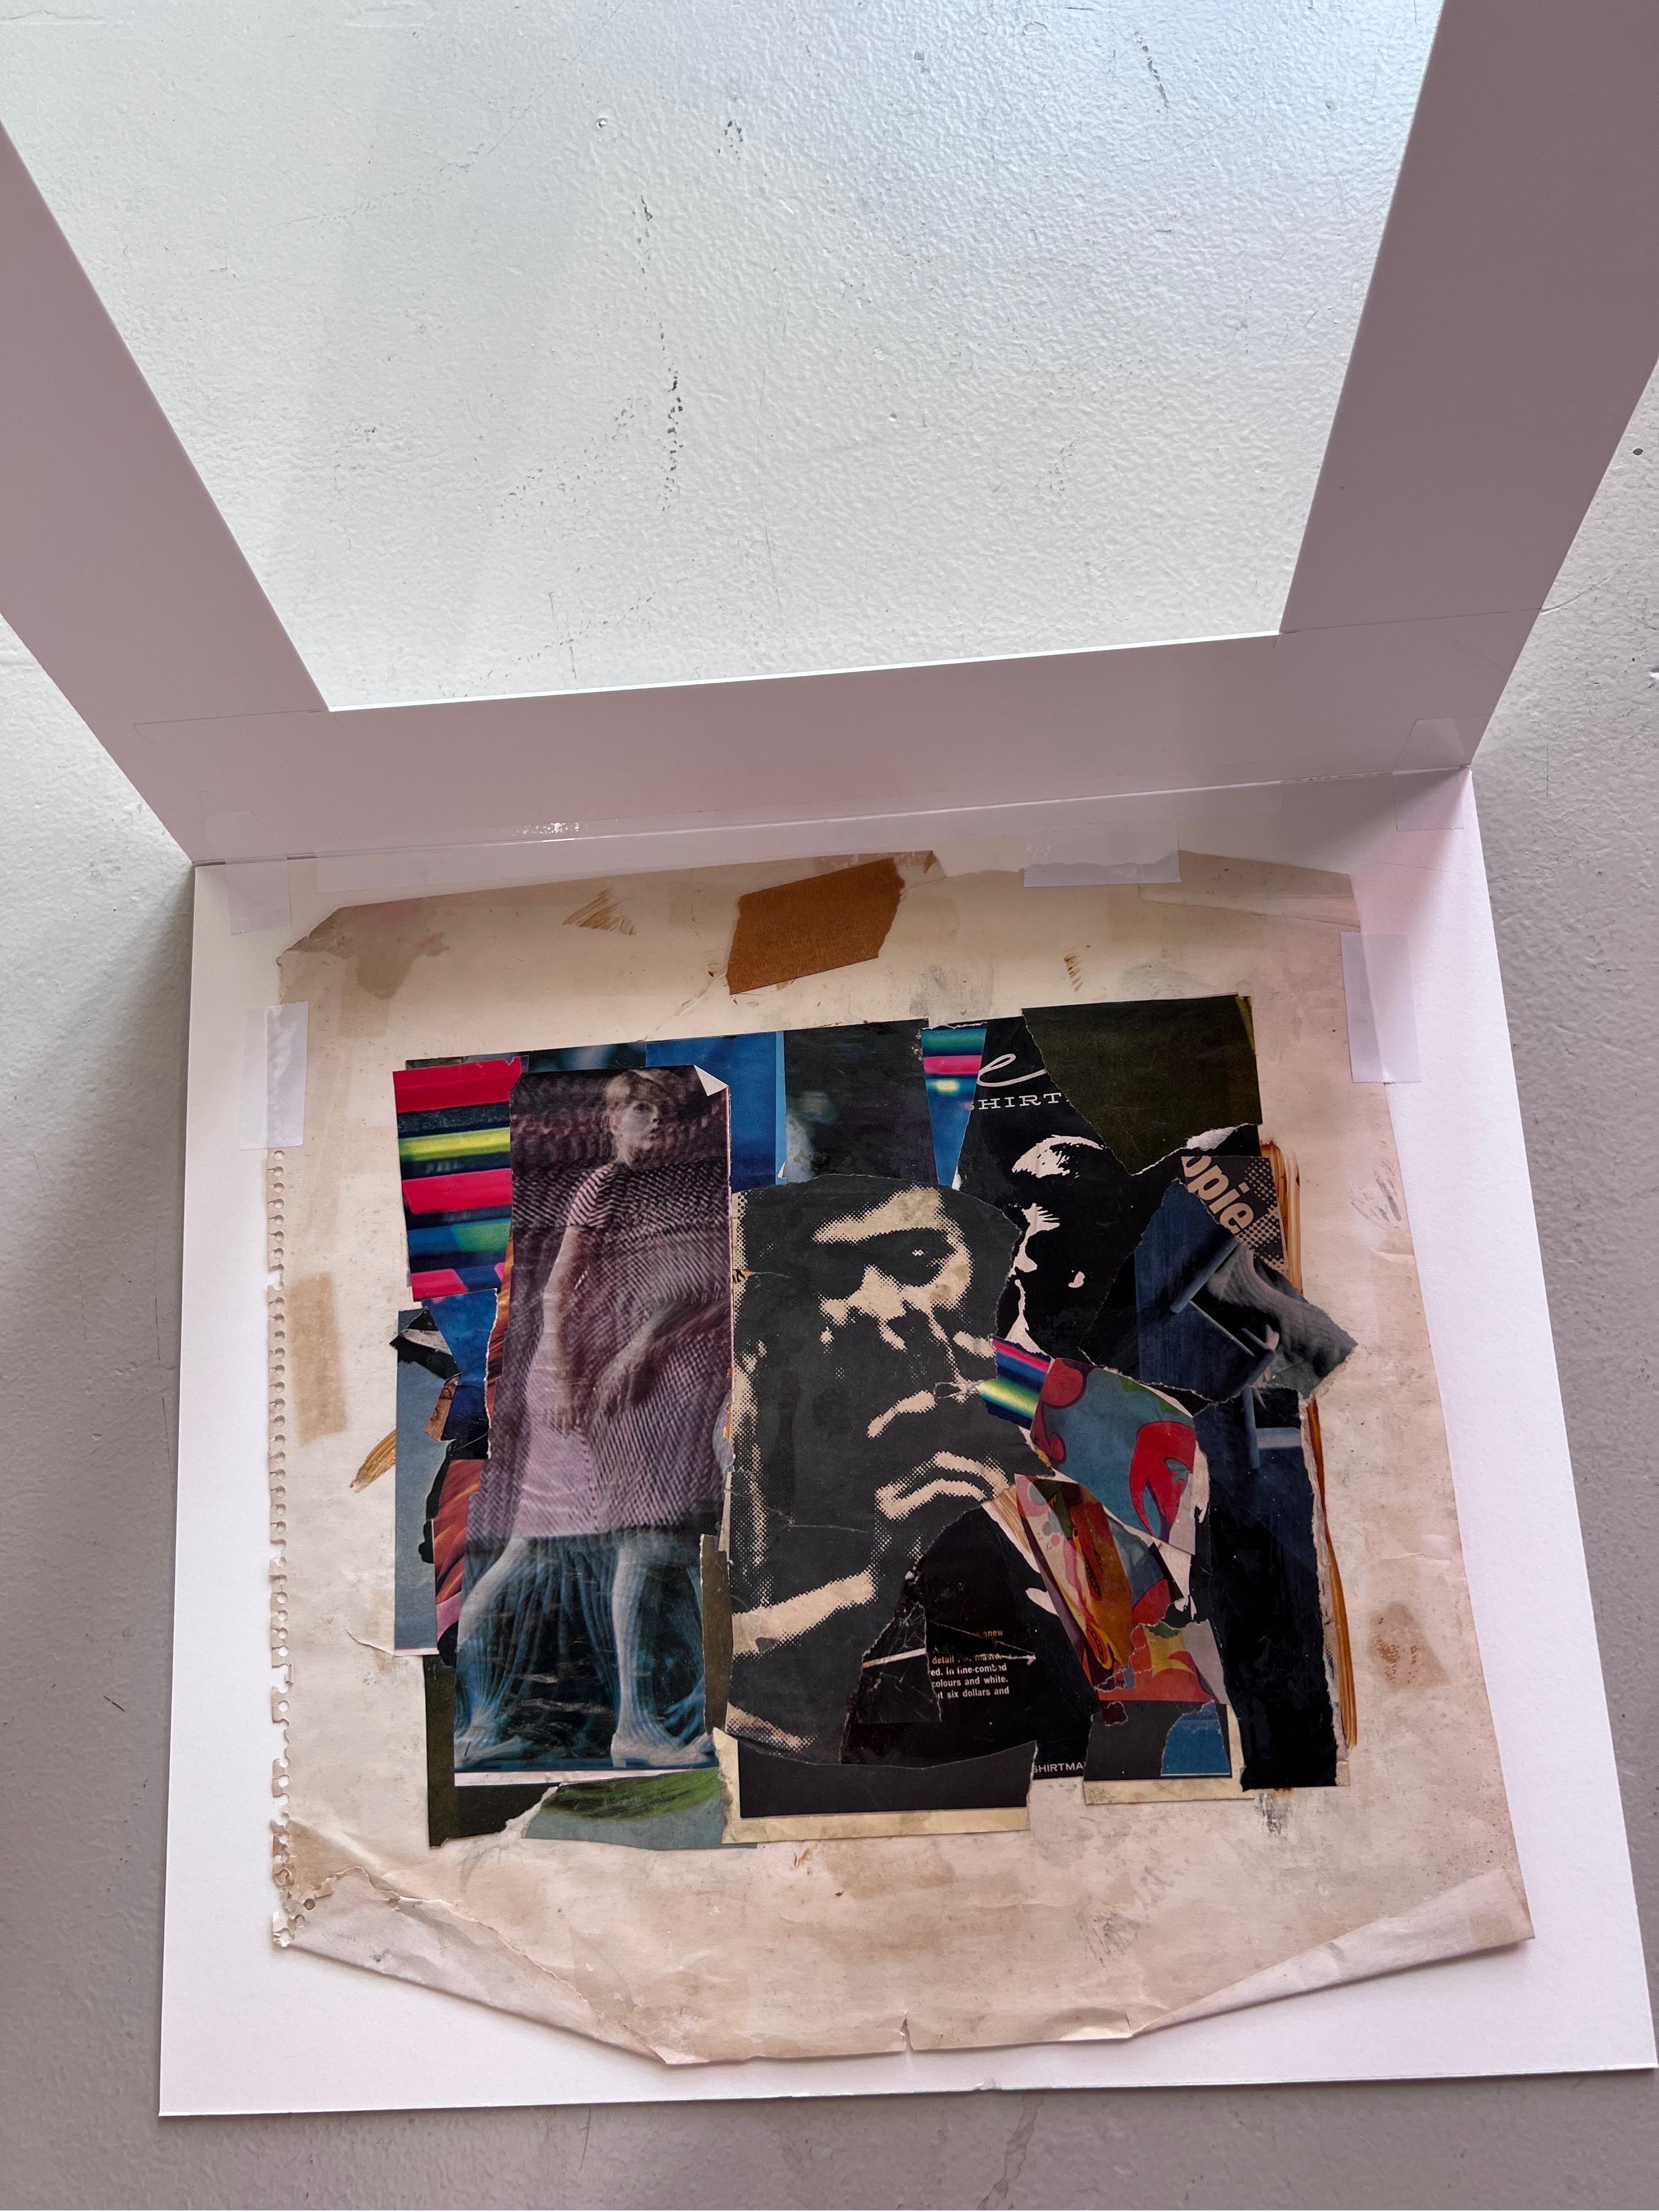 Paper and Adhesive collage by Wayne Timm. Image measures 11 x 13in. 

In the 1960's, Wayne Timm rubbed elbows with the likes of Warhol, Lichtenstein, Rauchenburg and many others, in the time he had an Art studio loft in New York City and while